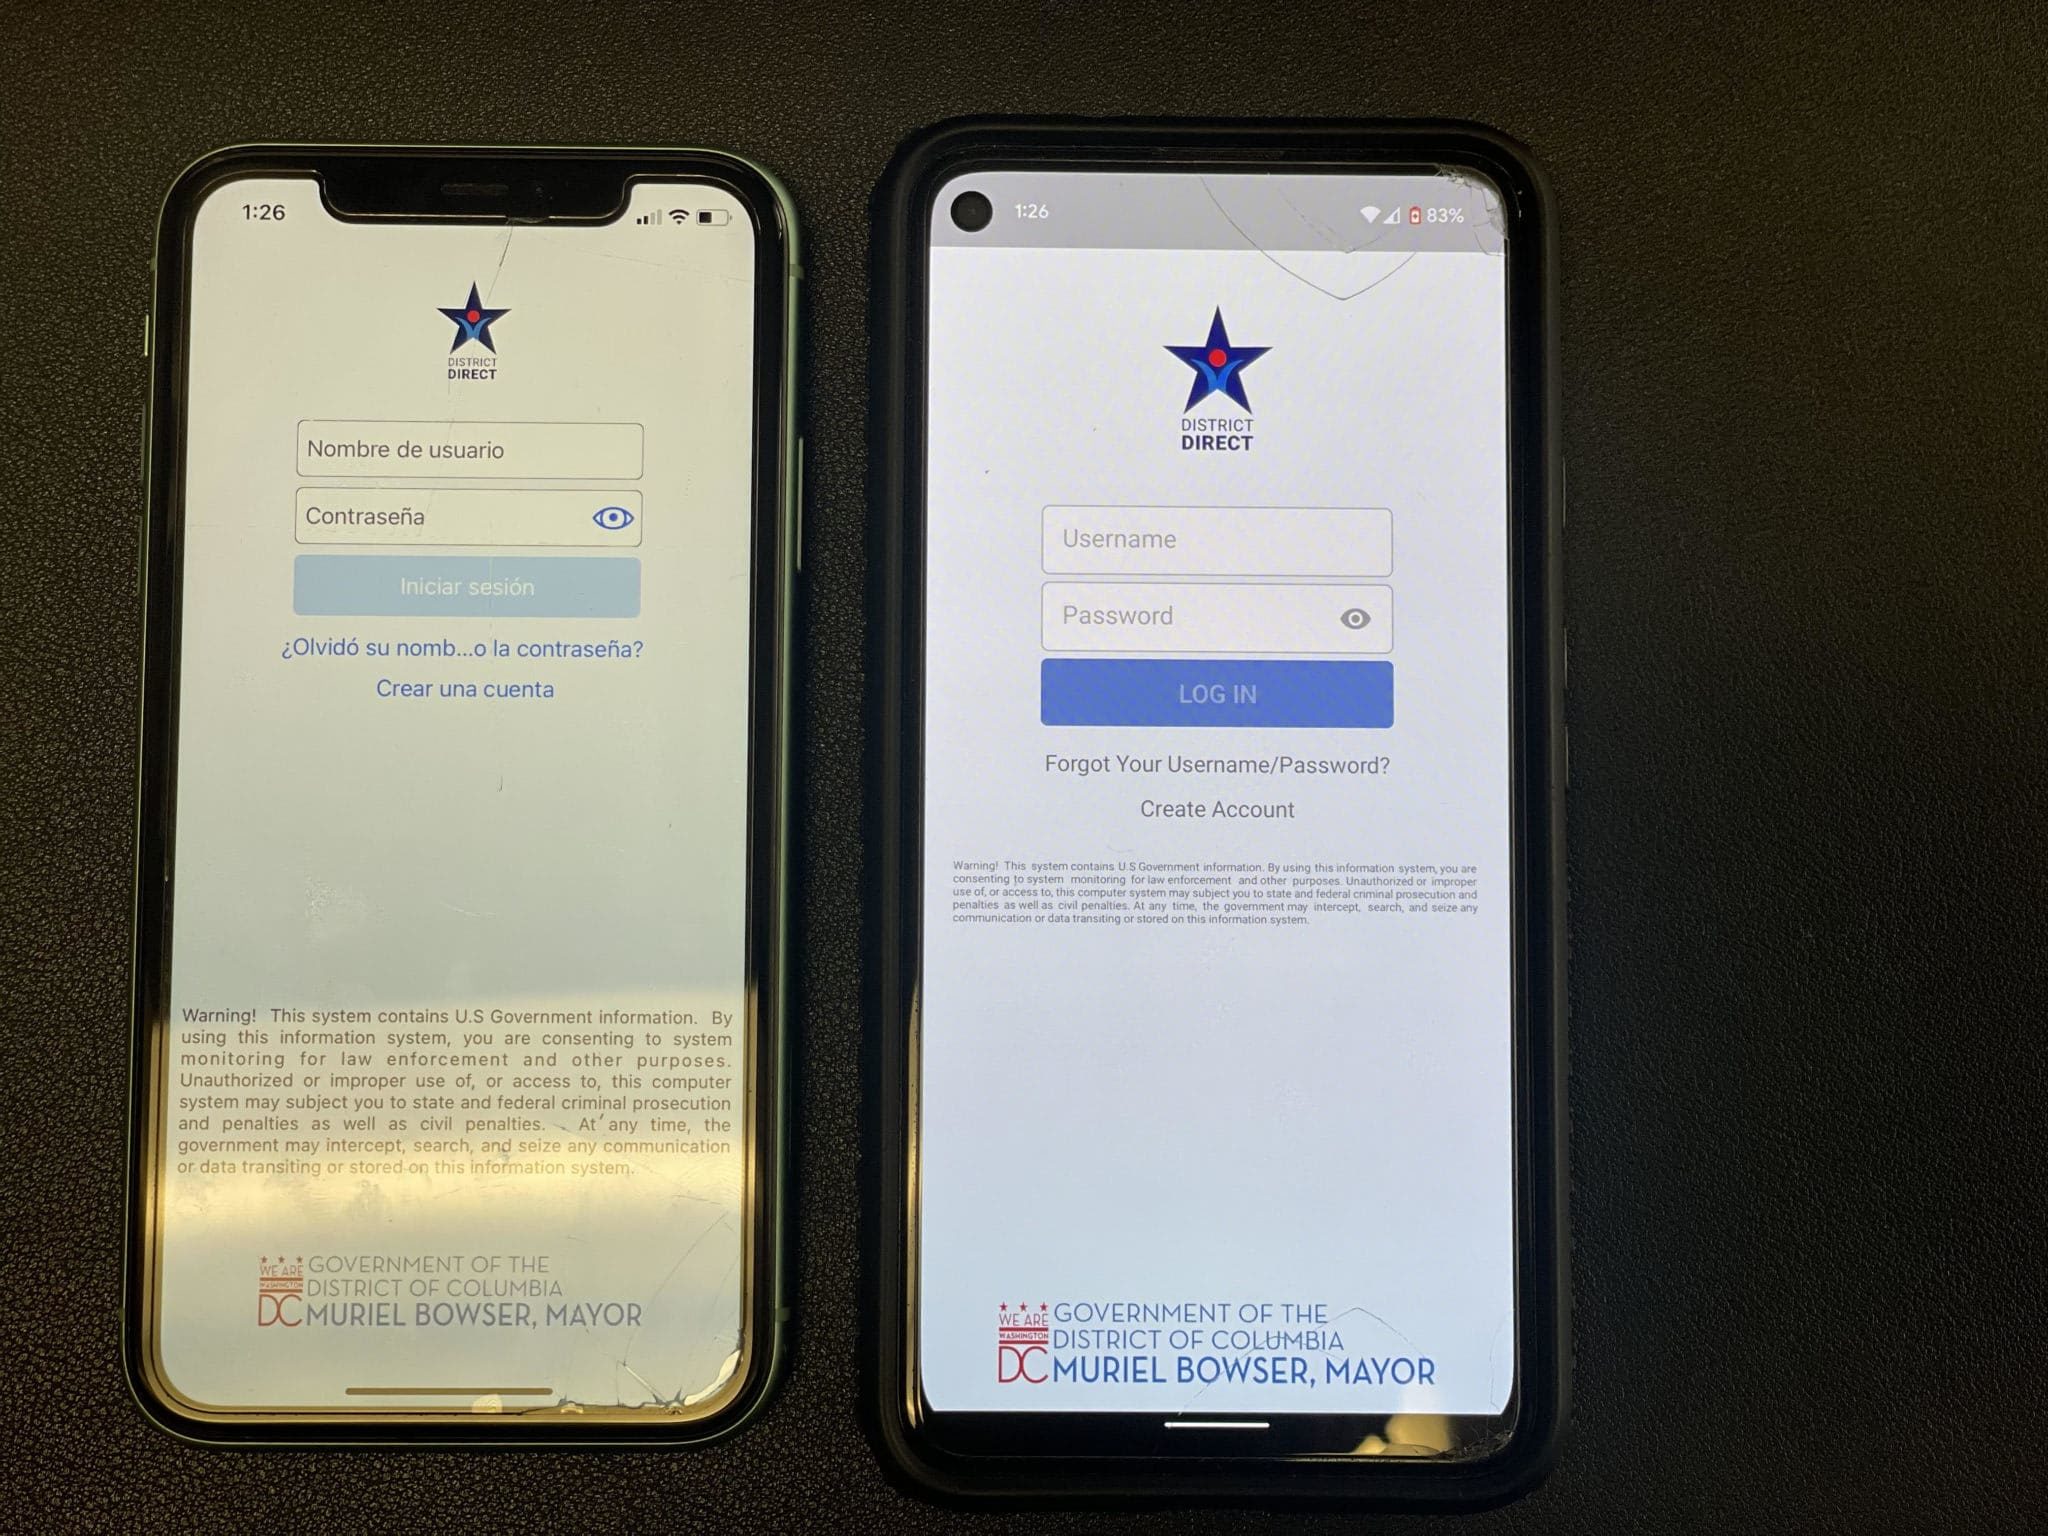 A photo of two phones side-by-side with the displaying the homepage of the District Direct mobile app